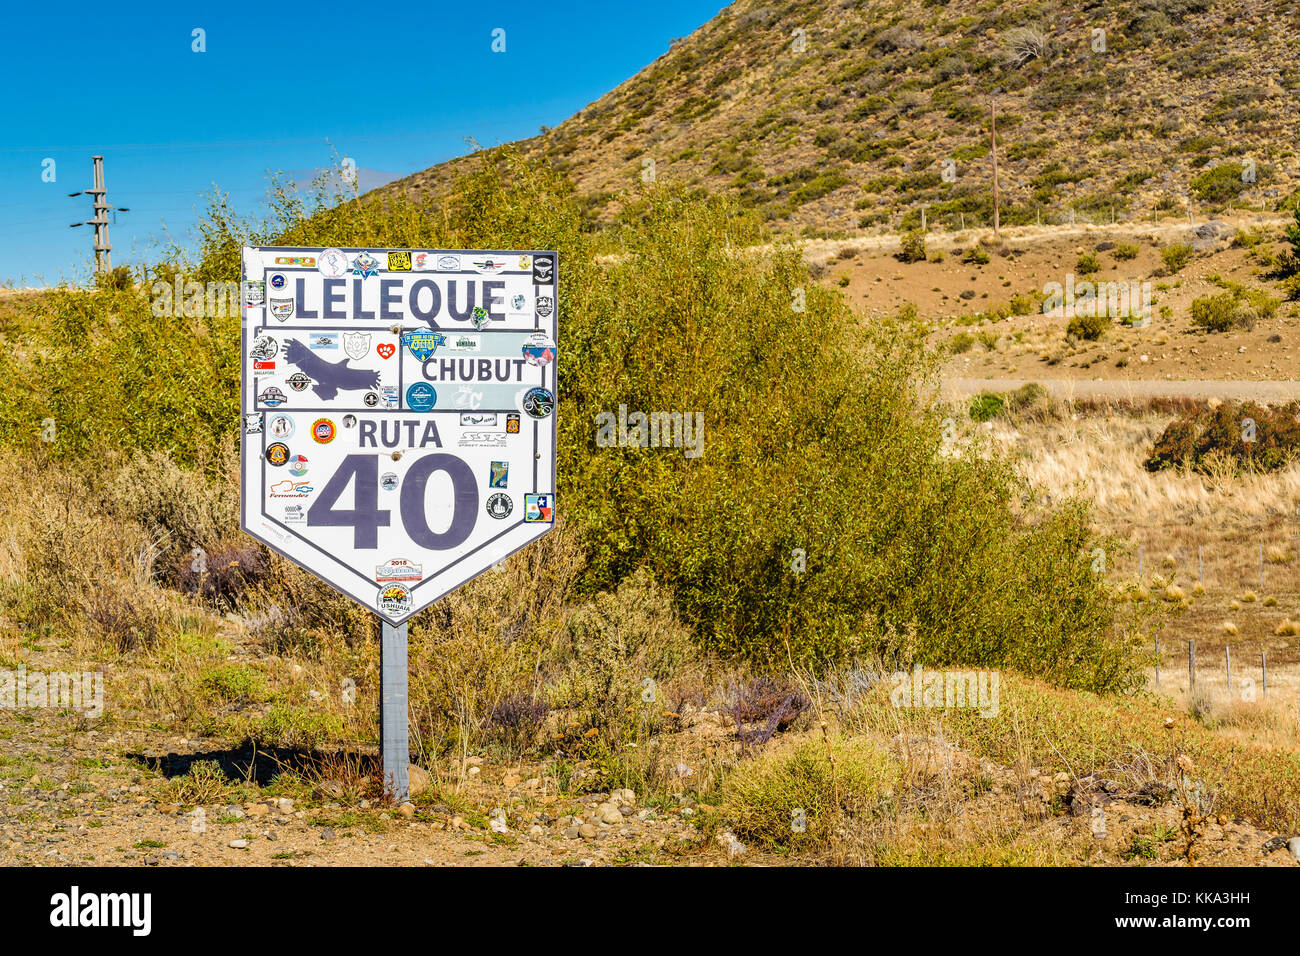 Route signpost at andean landscape scene at Chubut province, Argentina territory Stock Photo